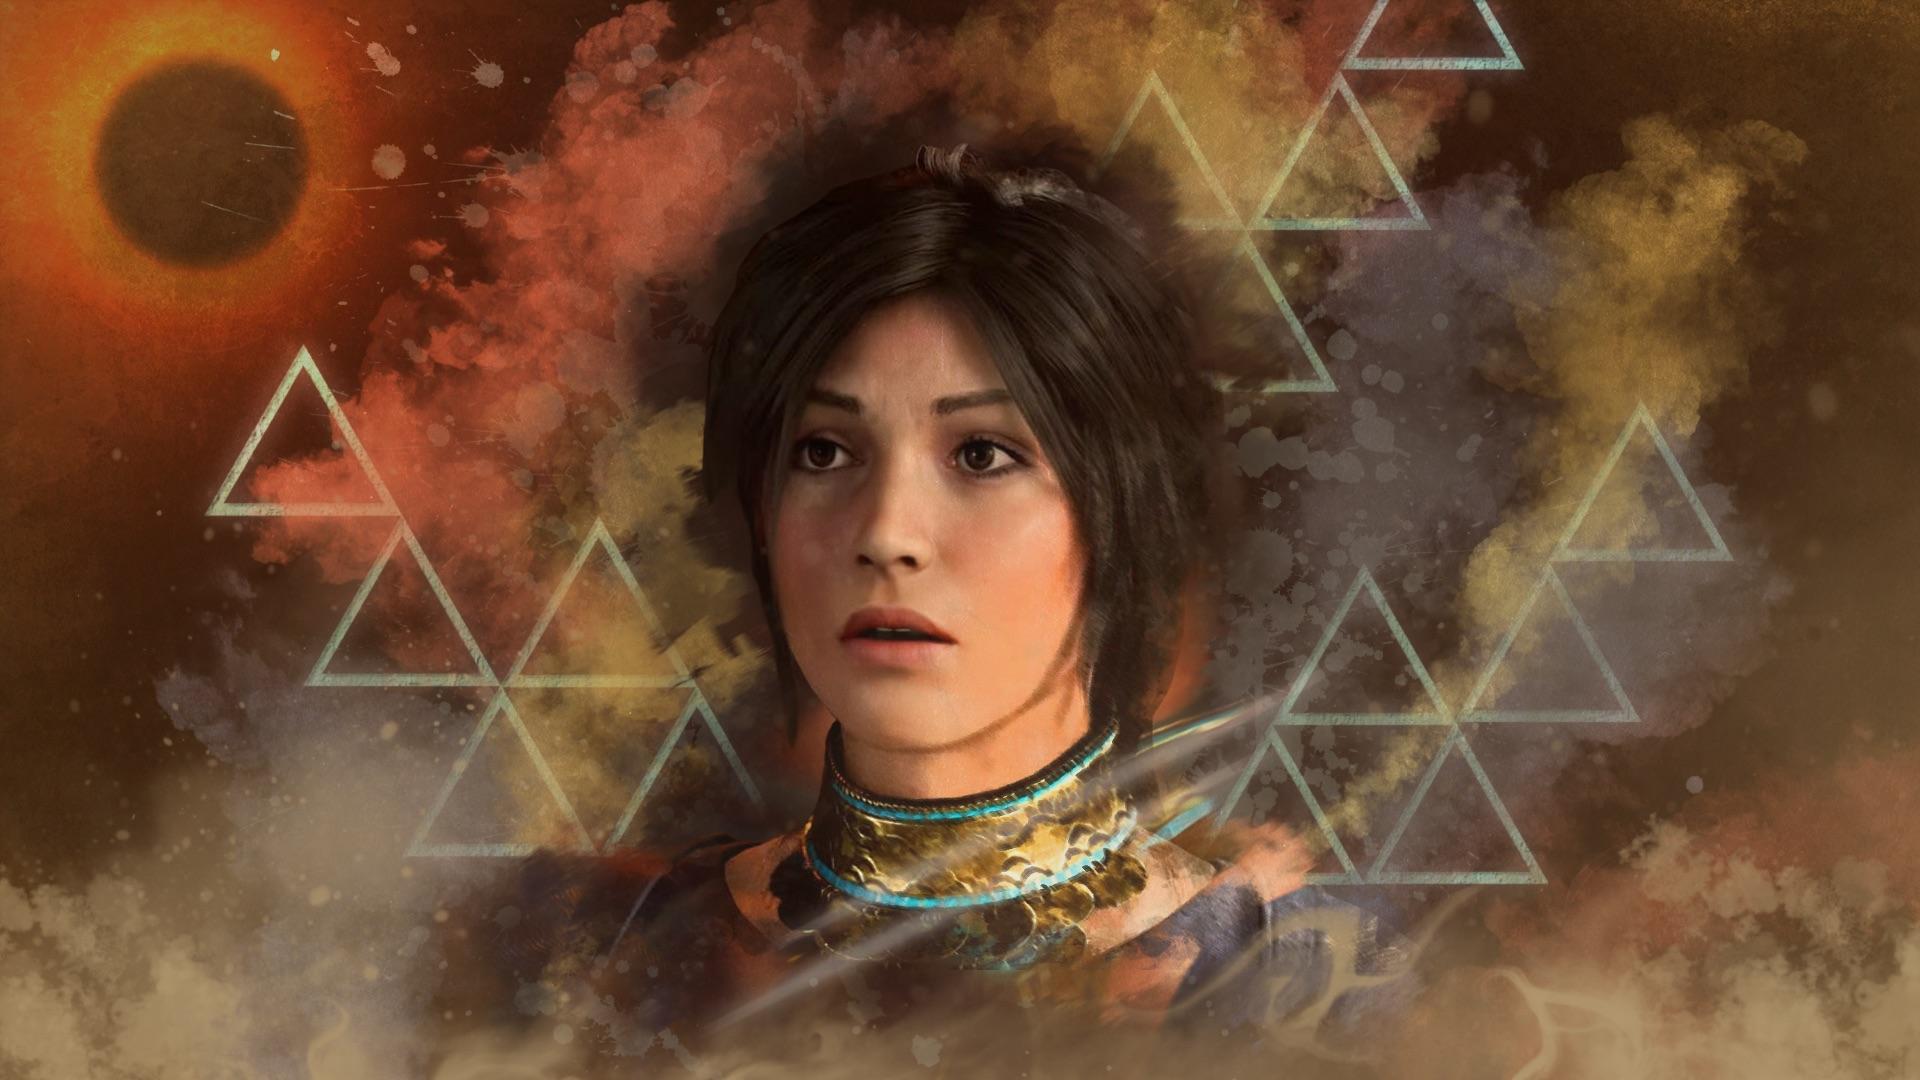 Shadow of the Tomb Raider Wallpapers